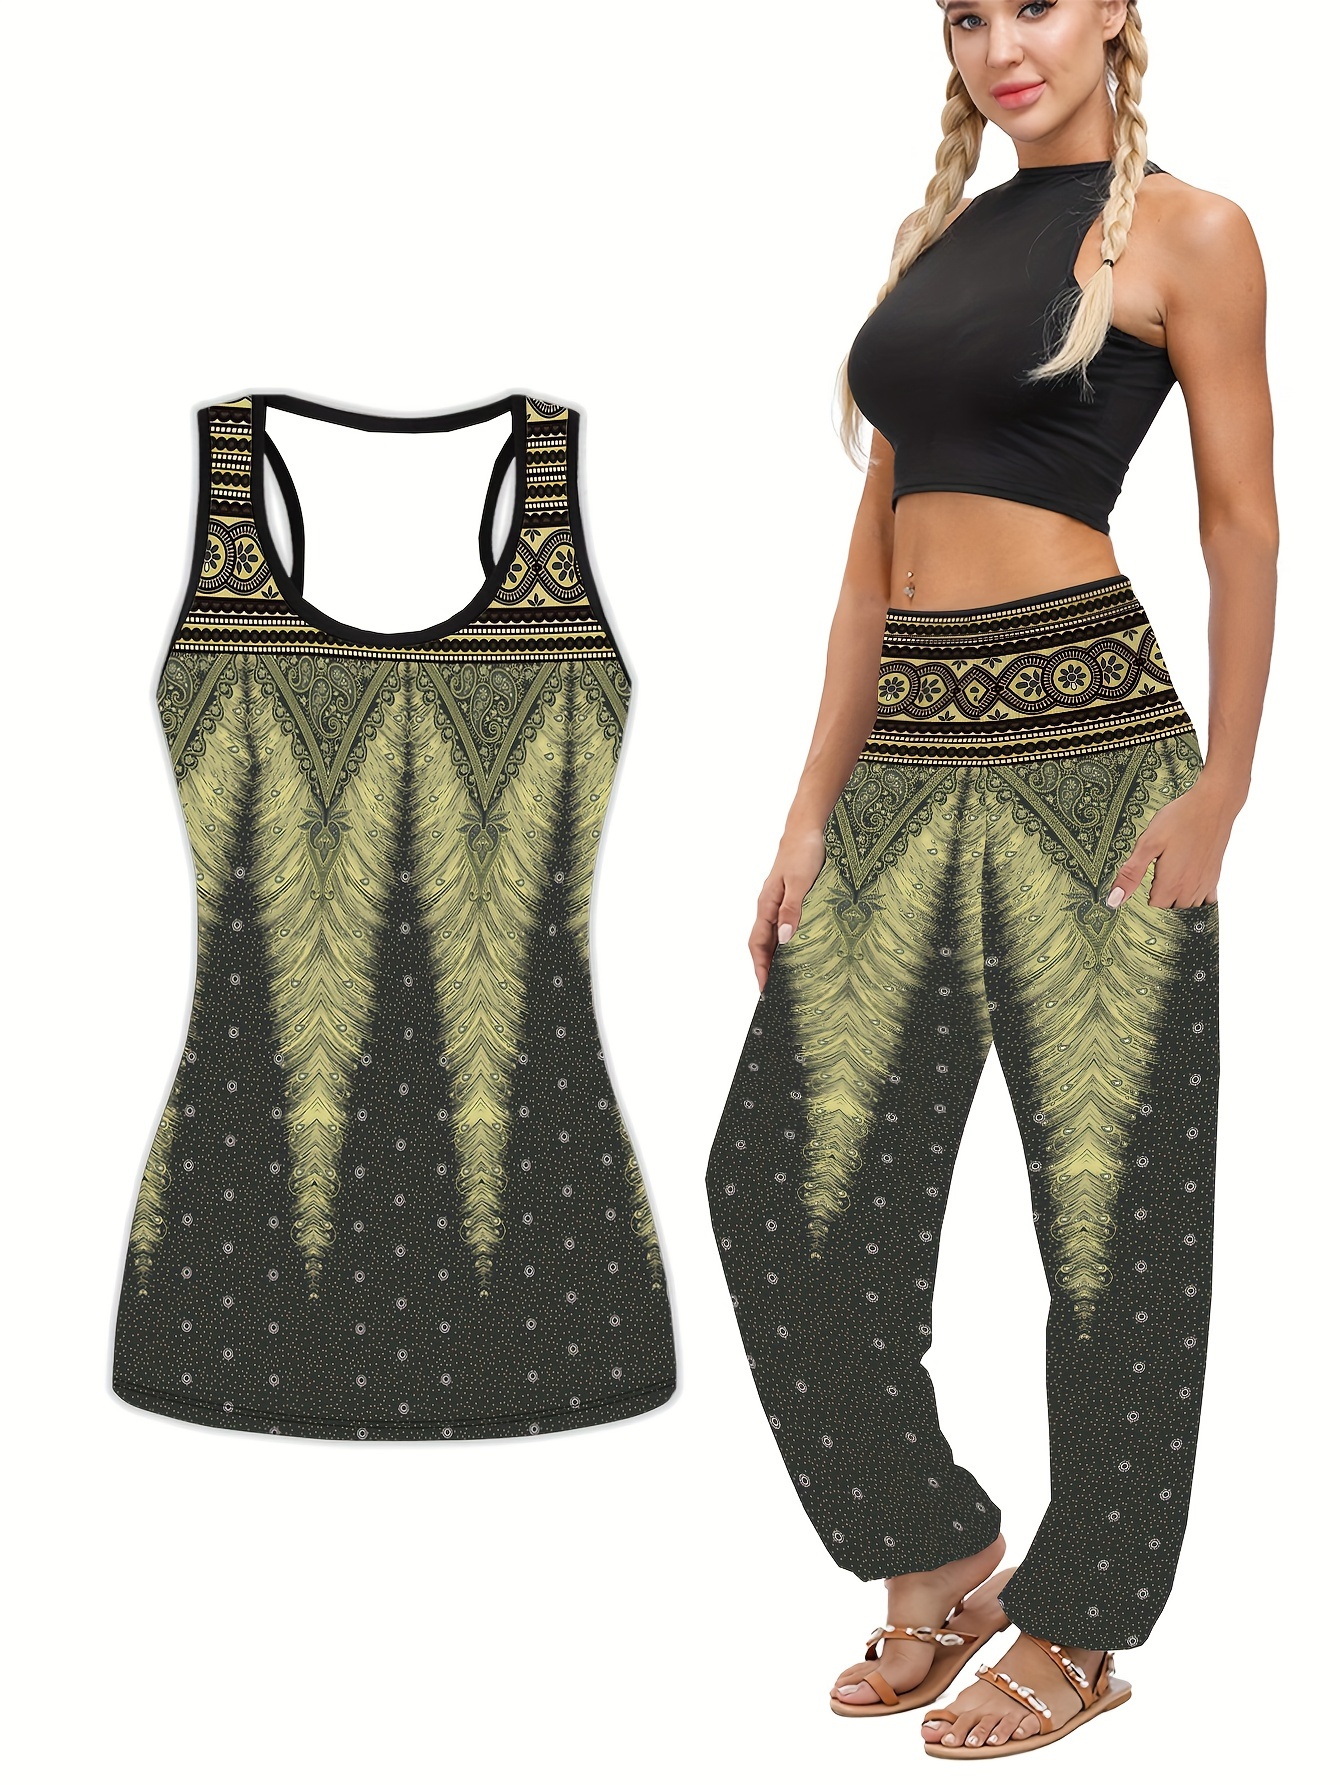 Buy Harem Pants Set With Sleeveless Top, Women Two Piece Outfit